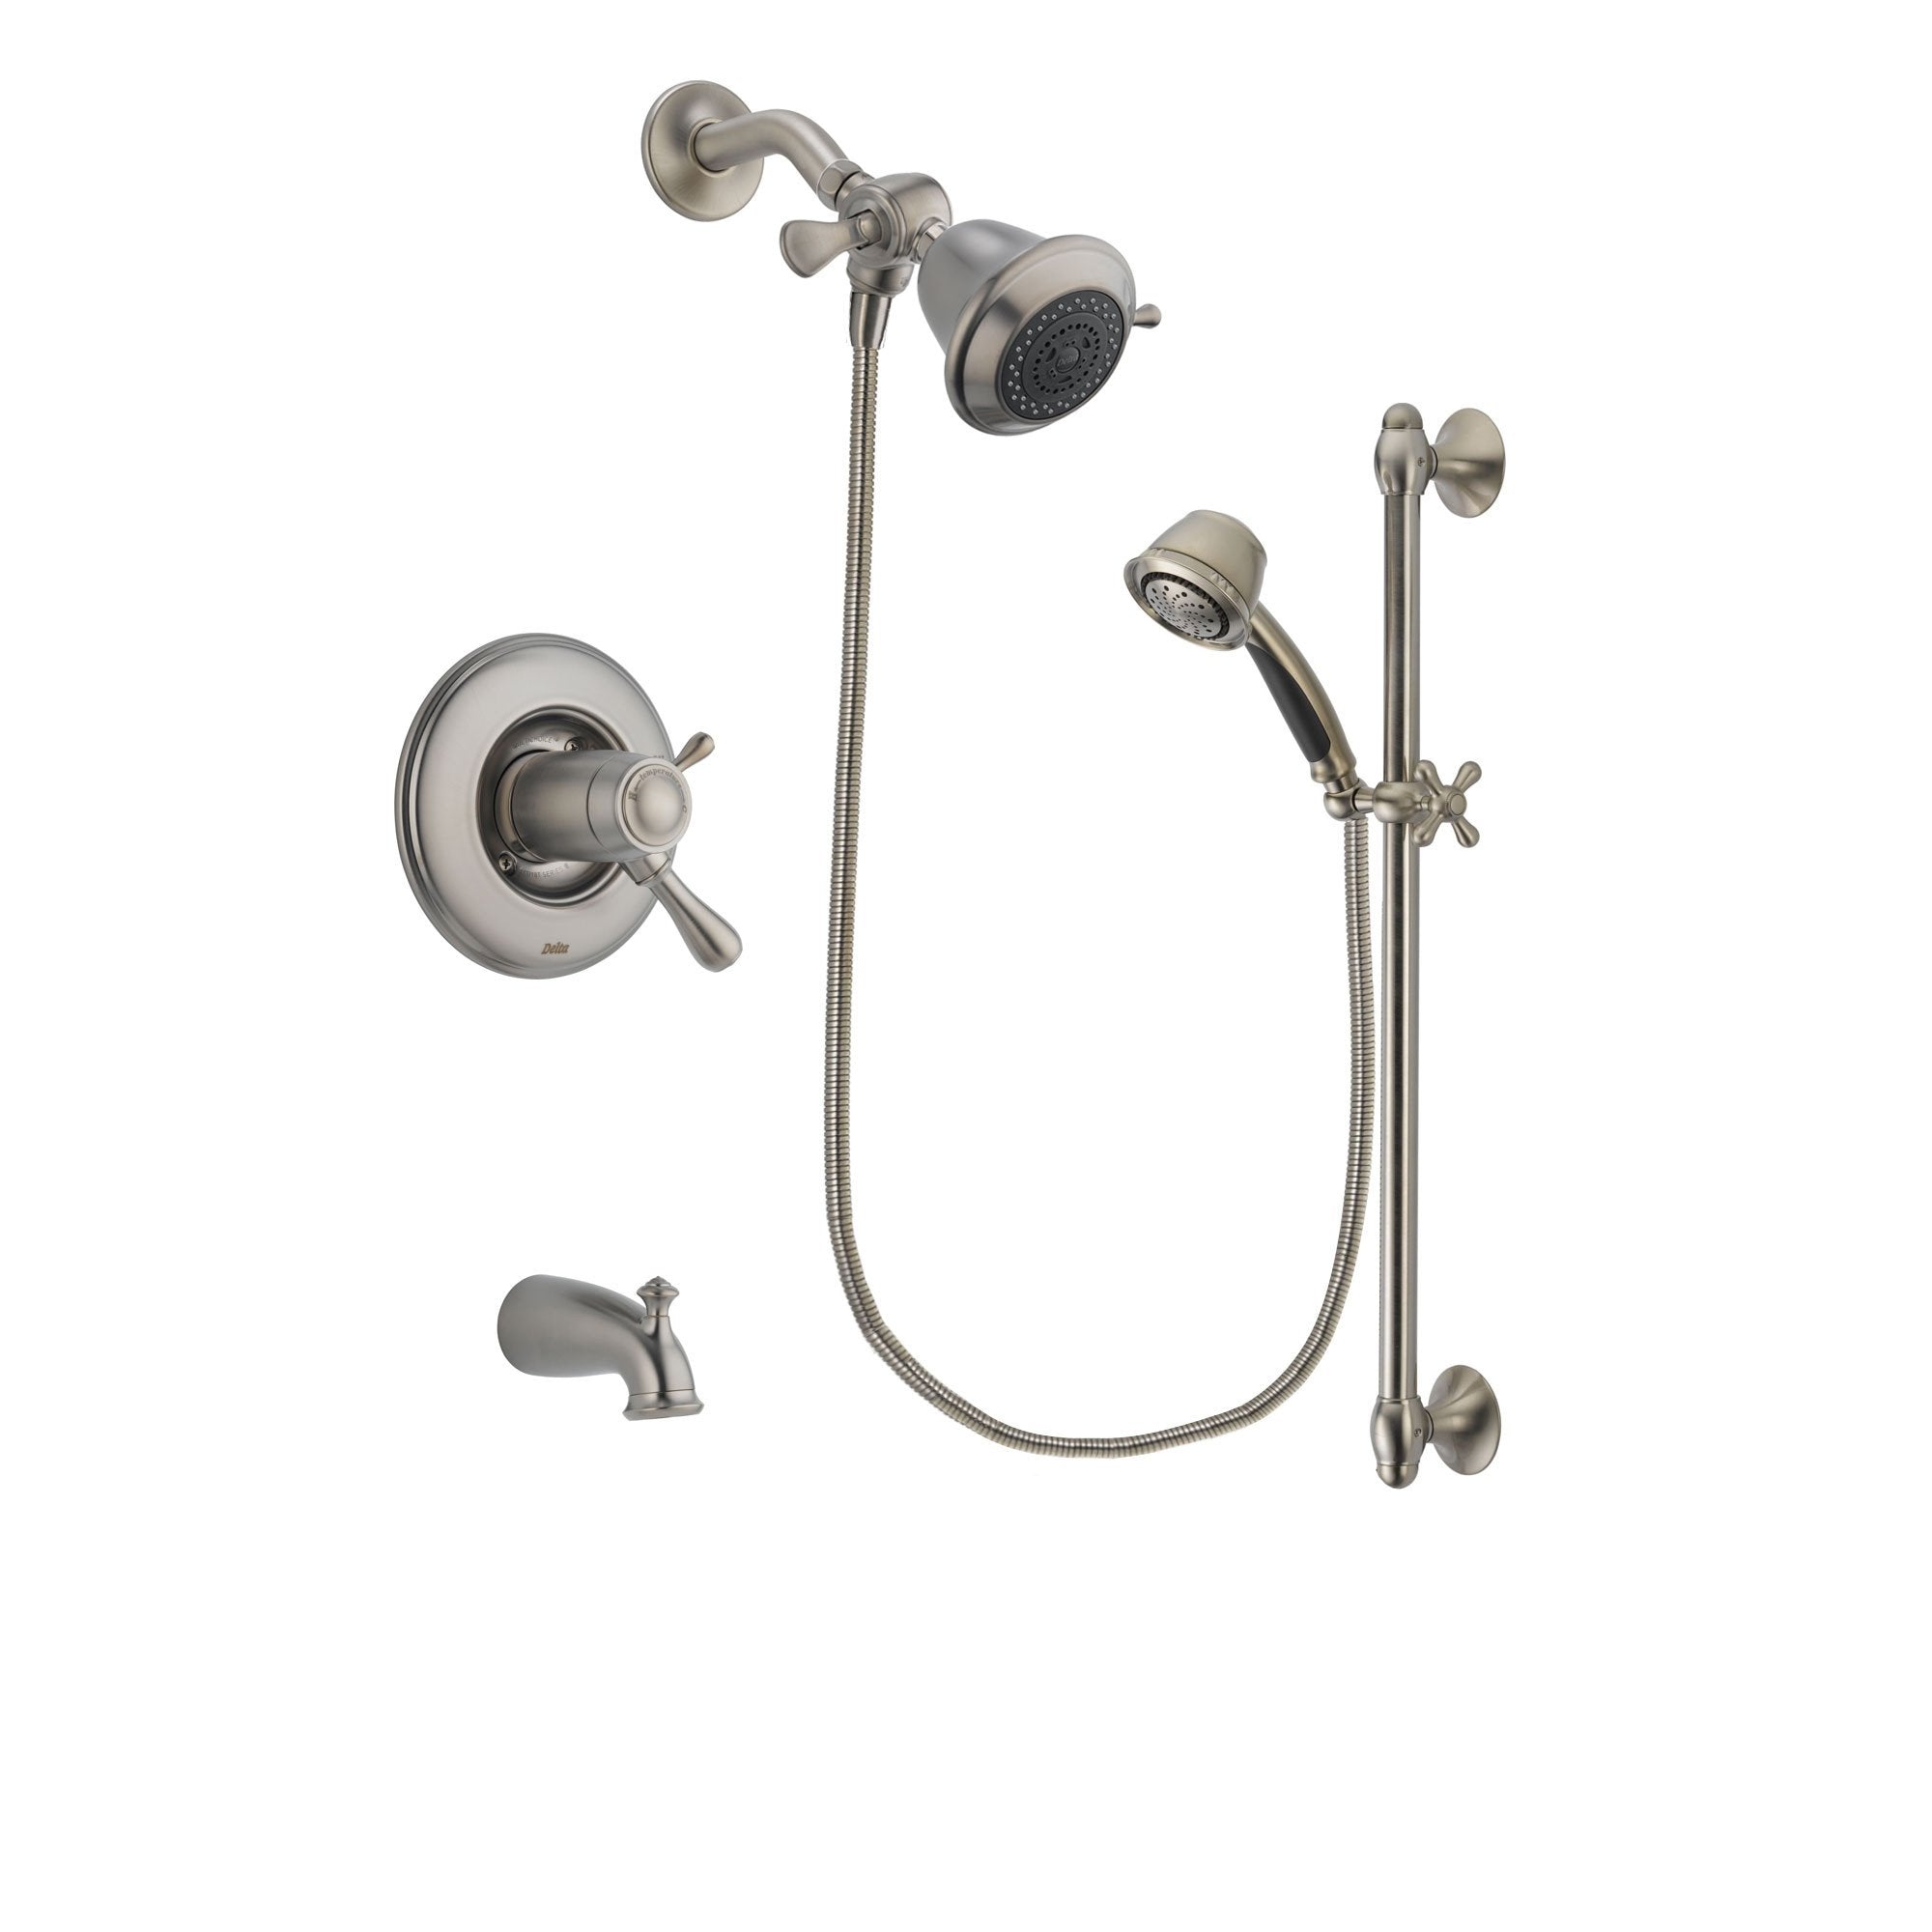 Delta Leland Stainless Steel Finish Thermostatic Tub and Shower Faucet System Package with Shower Head and 5-Spray Personal Handshower with Slide Bar Includes Rough-in Valve and Tub Spout DSP1245V